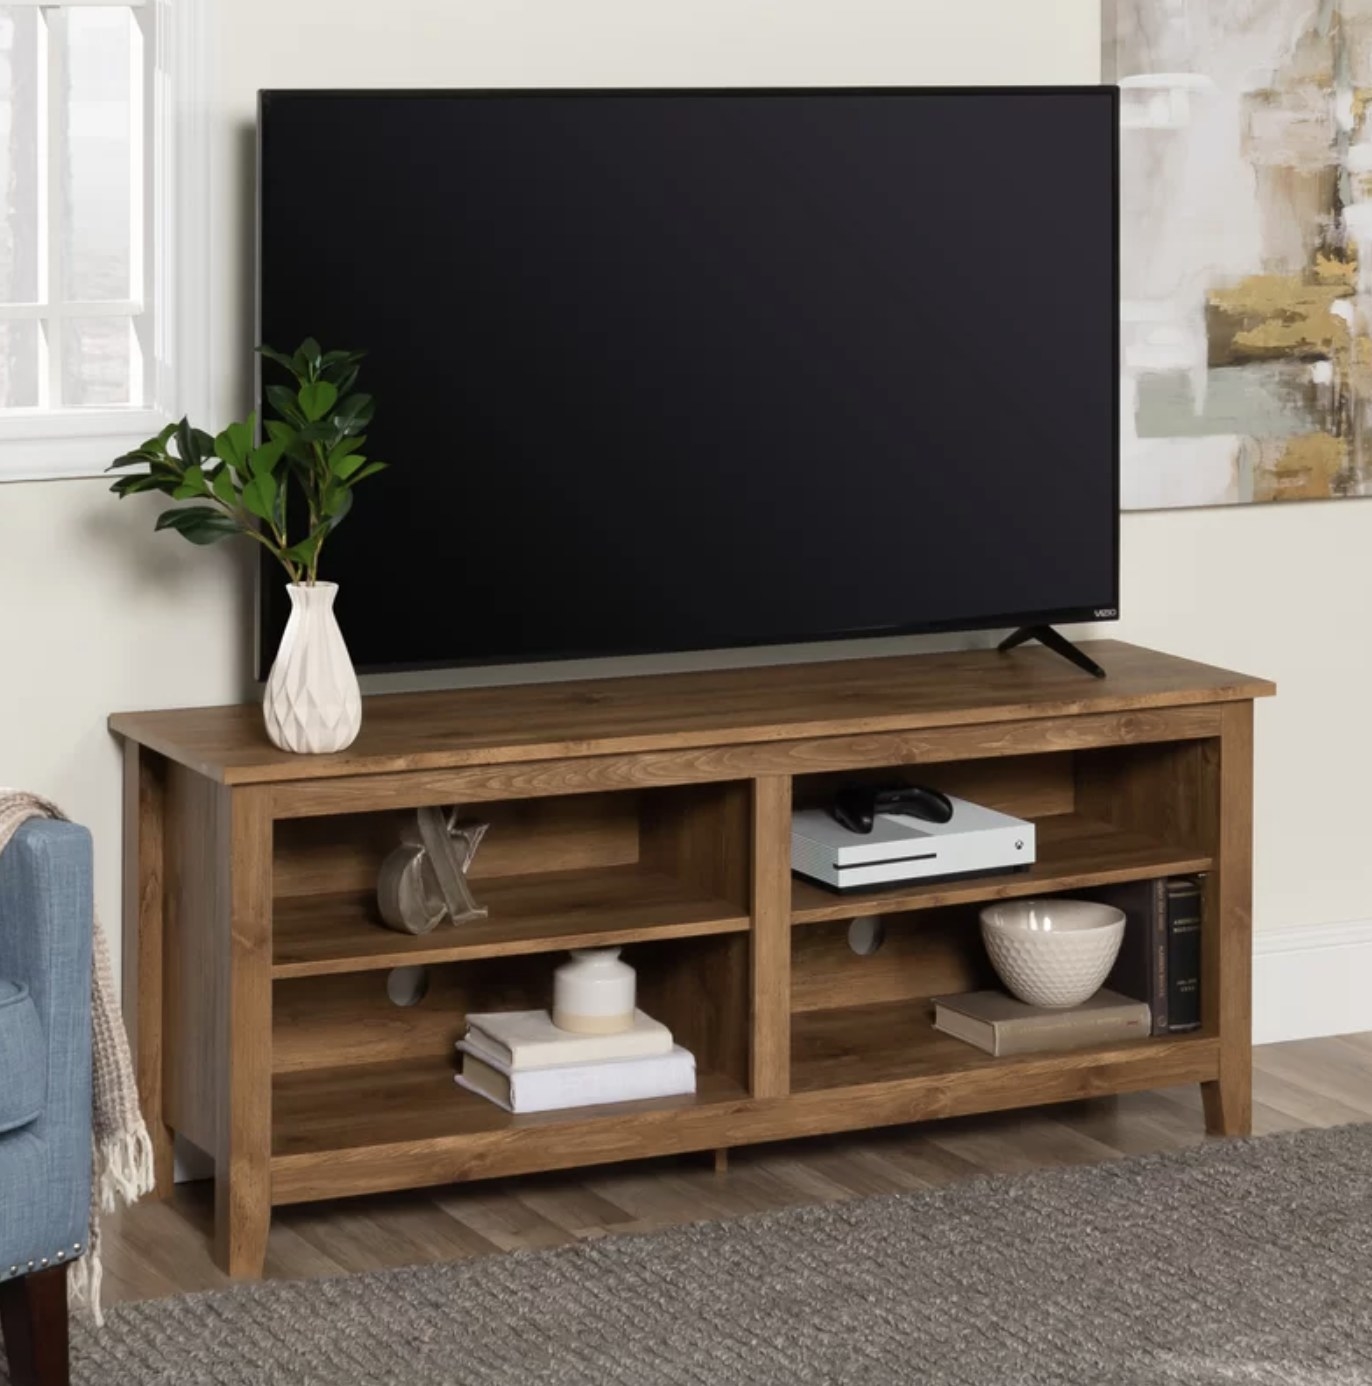 The barn wood colored stand is holding various decor items and a large black TV on top